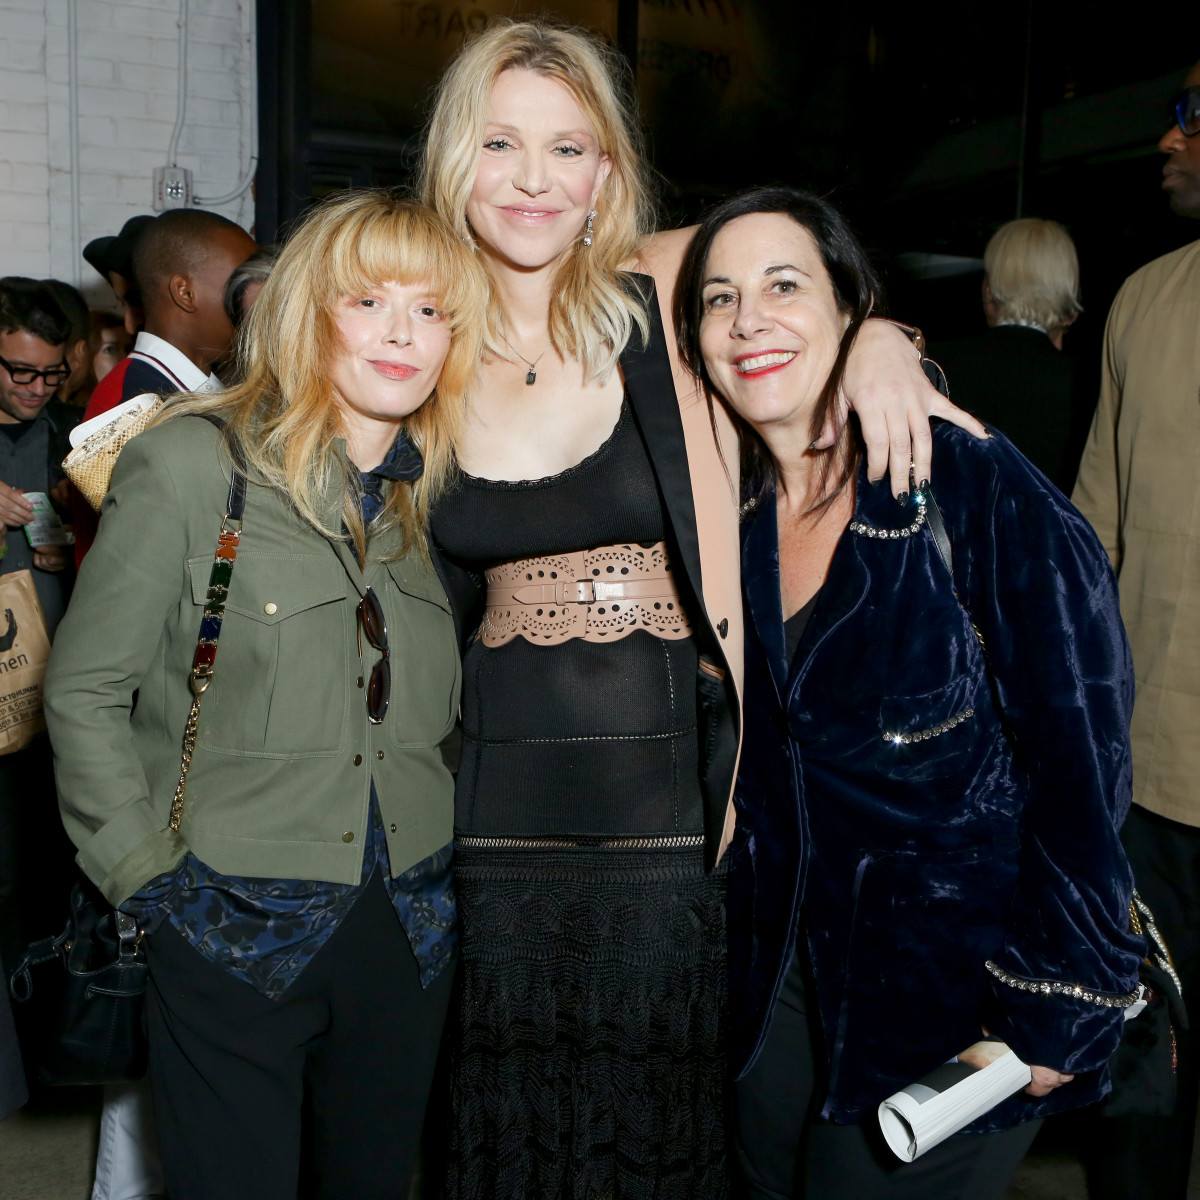 Natasha Lyonne, Courtney Love and Arianne Phillips at the screening of 'Dressing the Part' presented by Mr. Porter. Photo: courtesy Mr. Porter